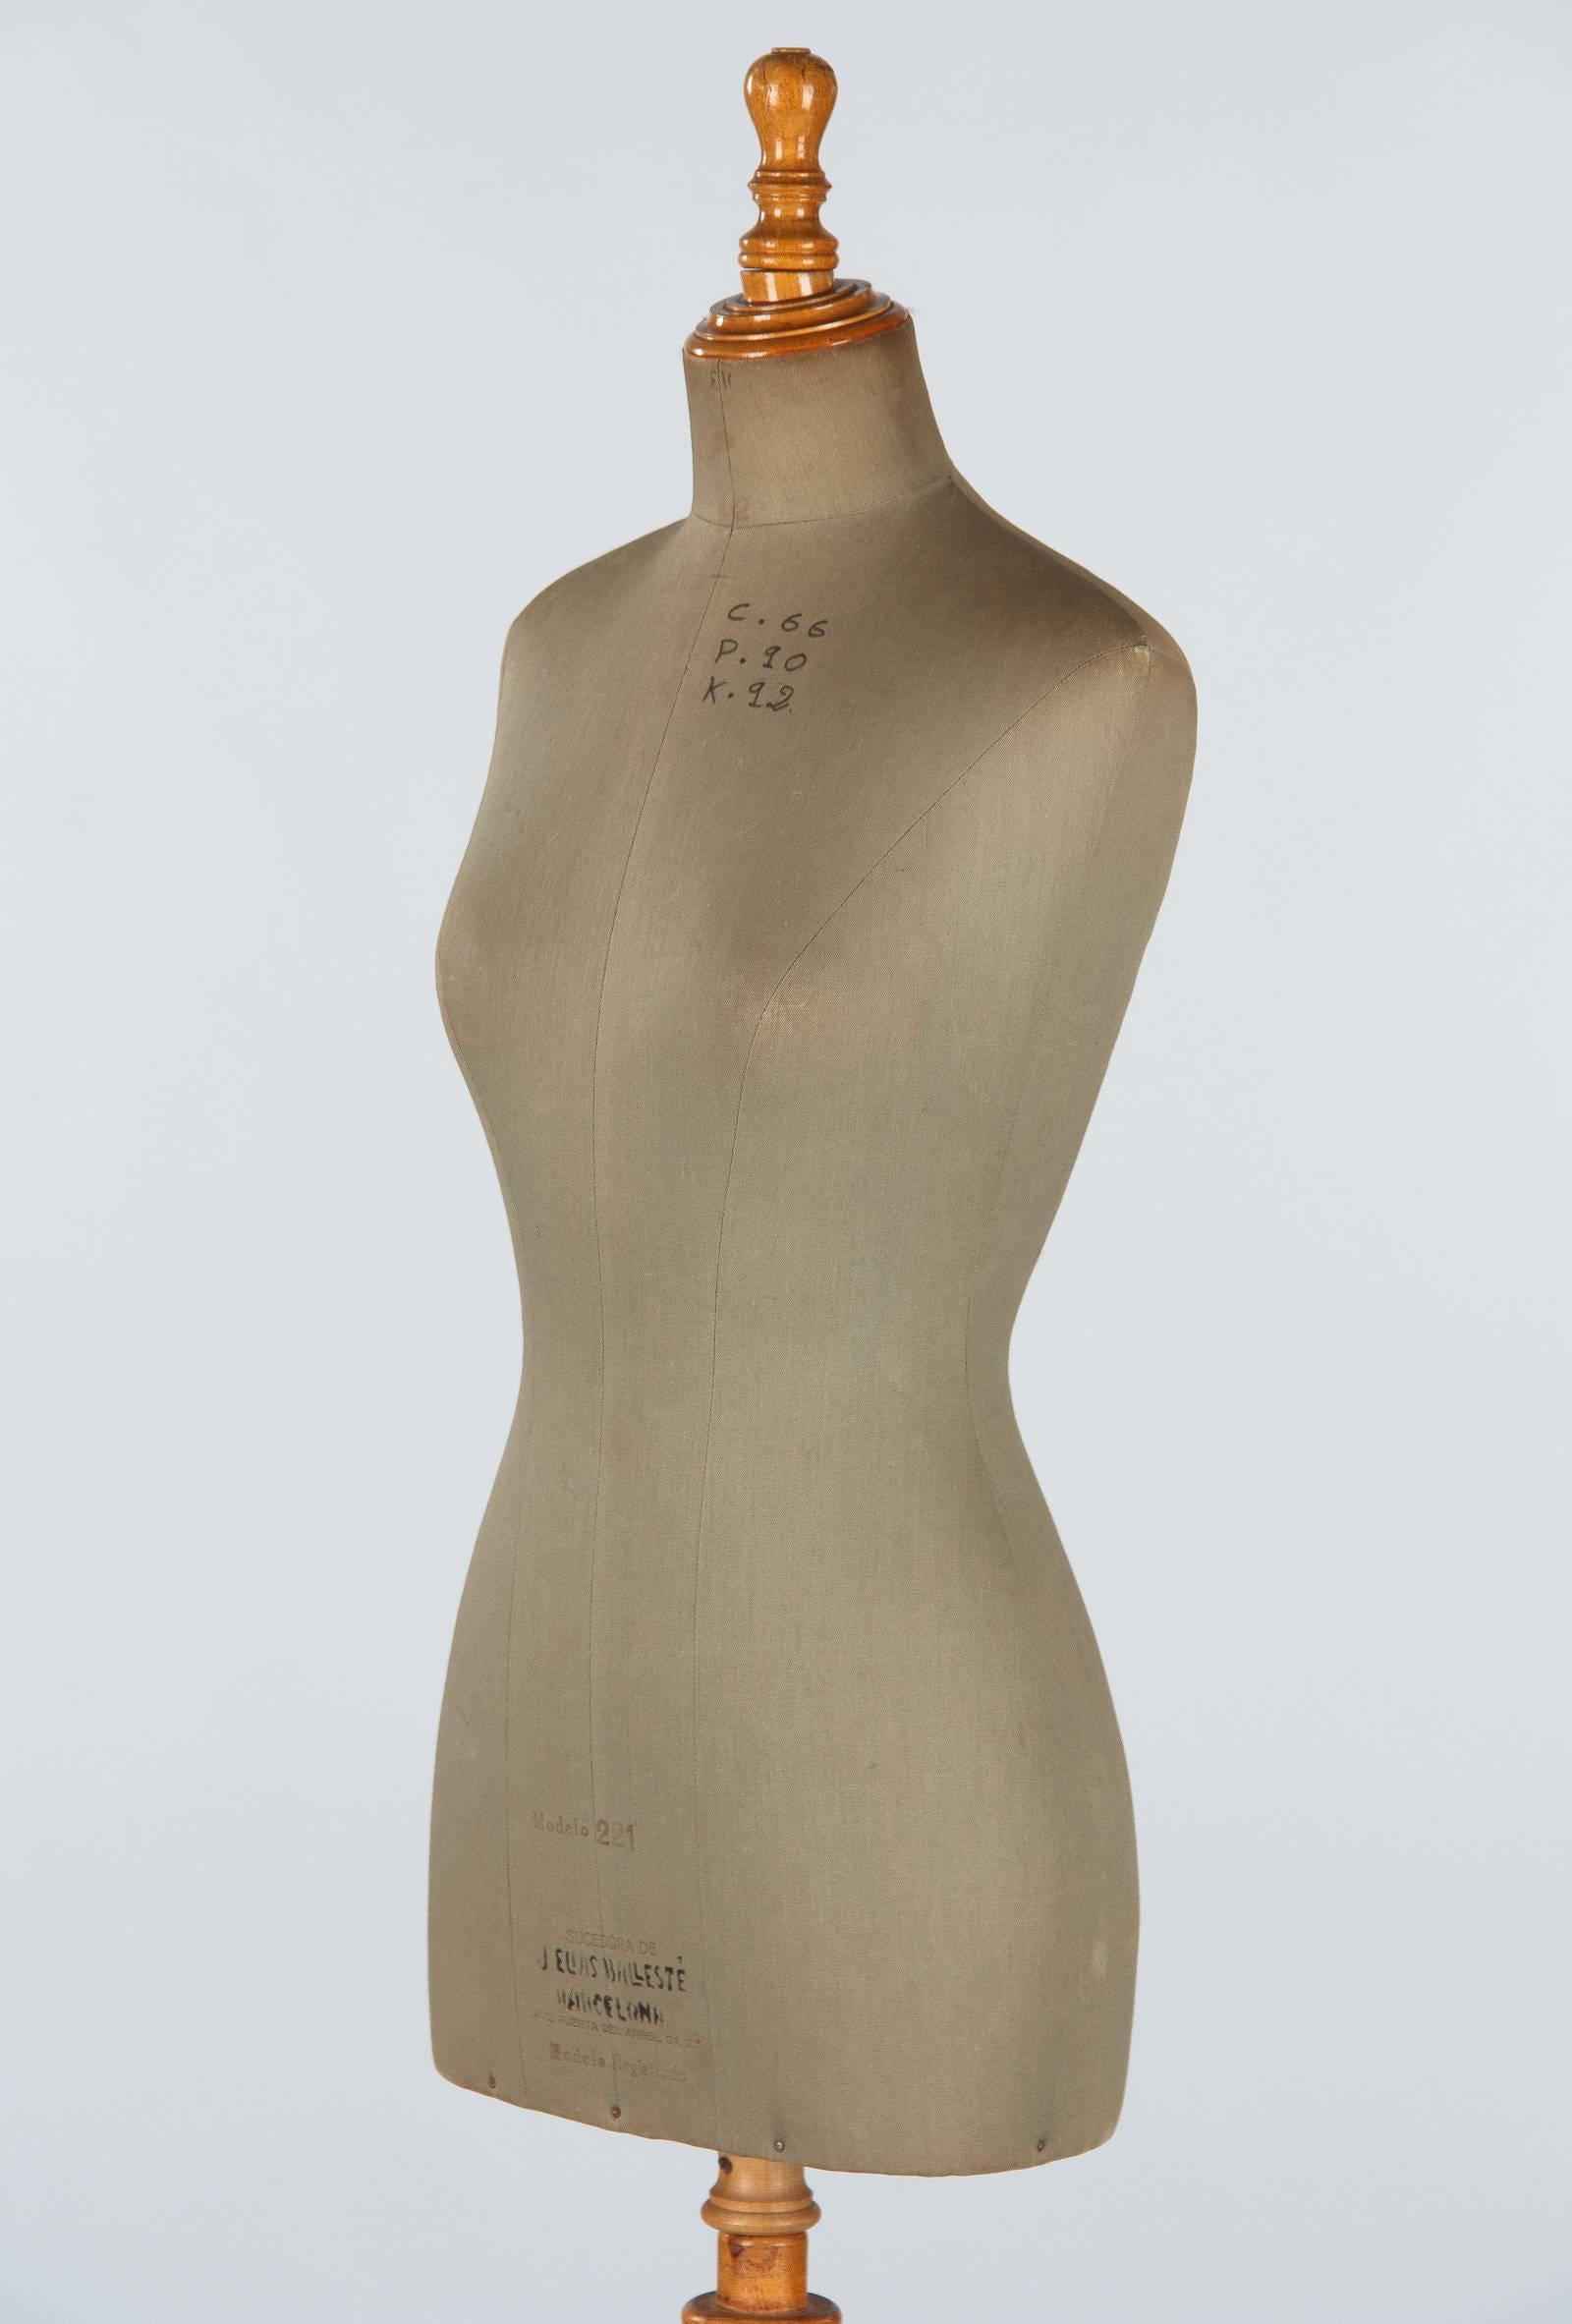 20th Century Spanish Dress Form Mannequin by J. Elias Balleste, Early 1900s